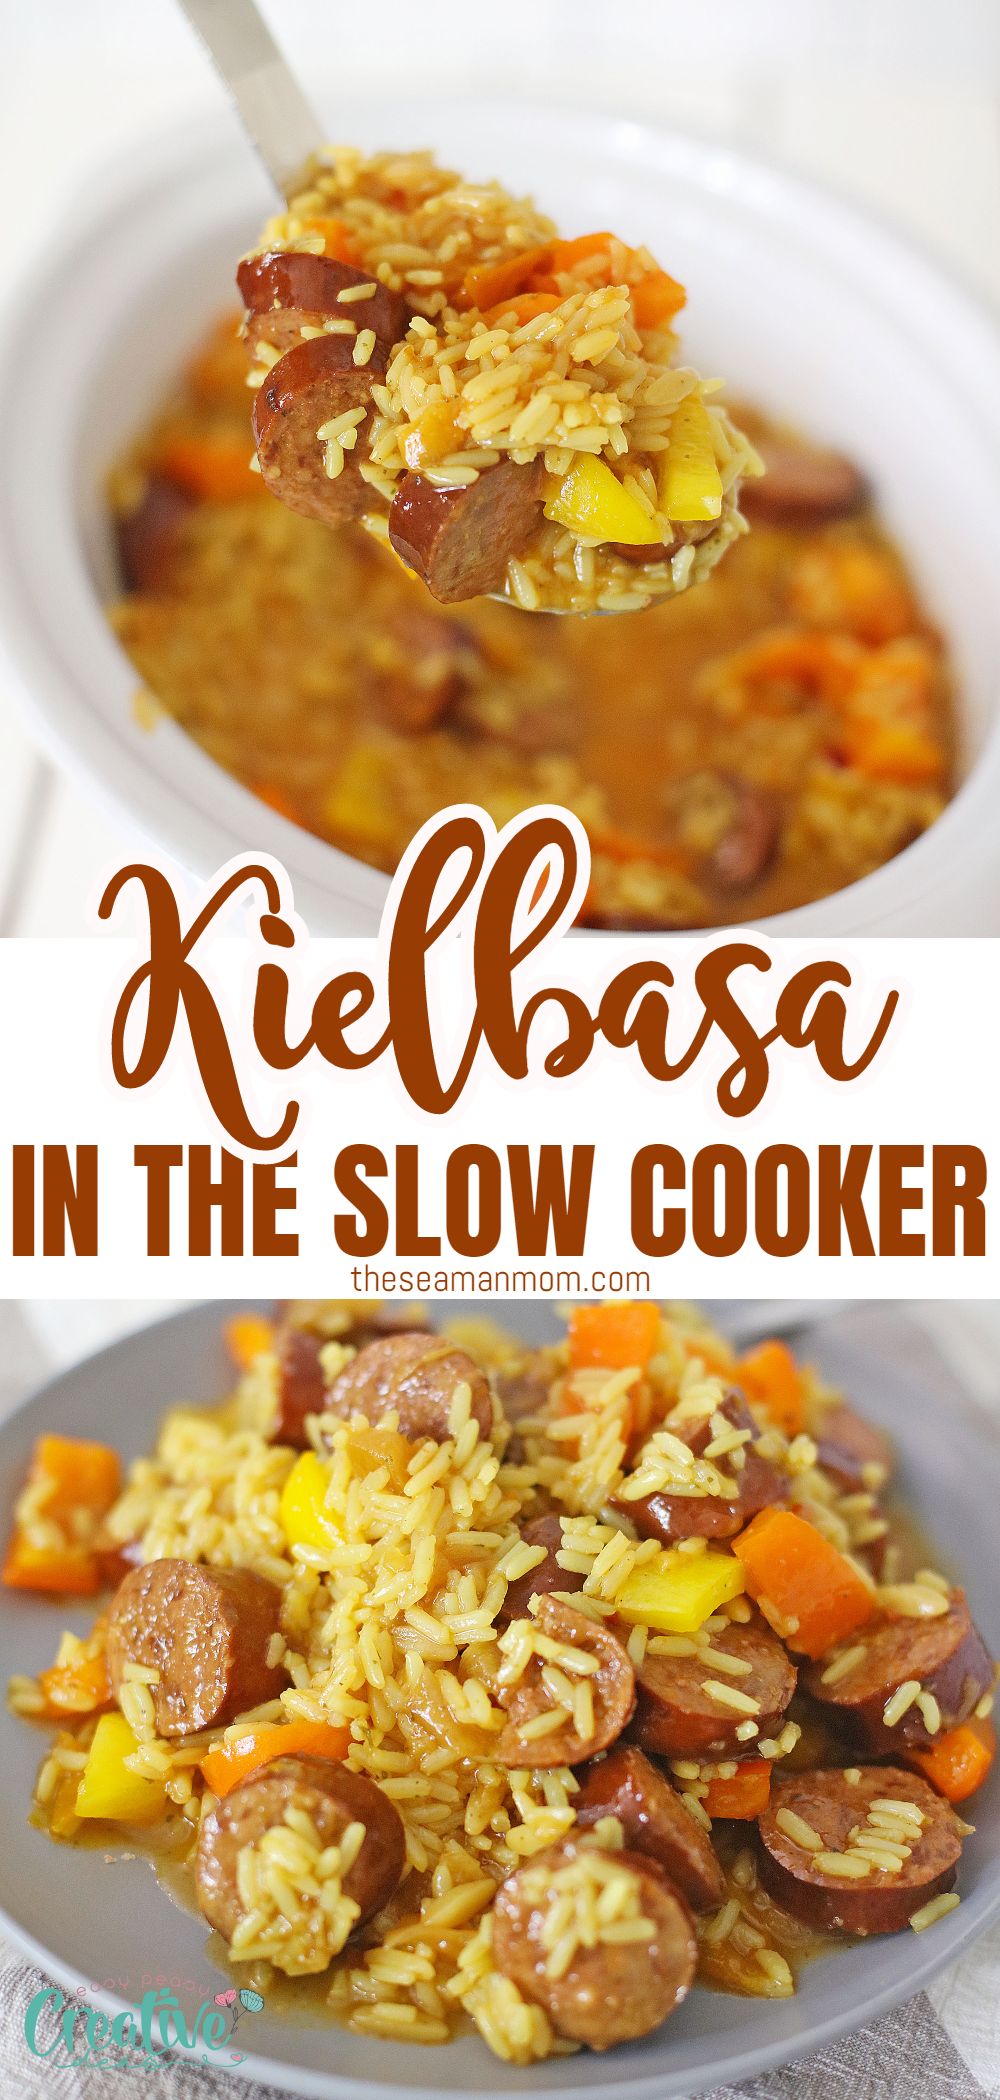 Do you love easy dinner recipes? This crock pot kielbasa sausage recipe is a great way to use up your leftover vegetables. It’s also a perfect dish for those busy weeknights when you don’t have time to cook. You can just throw everything in the slow cooker and come back later to an amazing meal! via @petroneagu